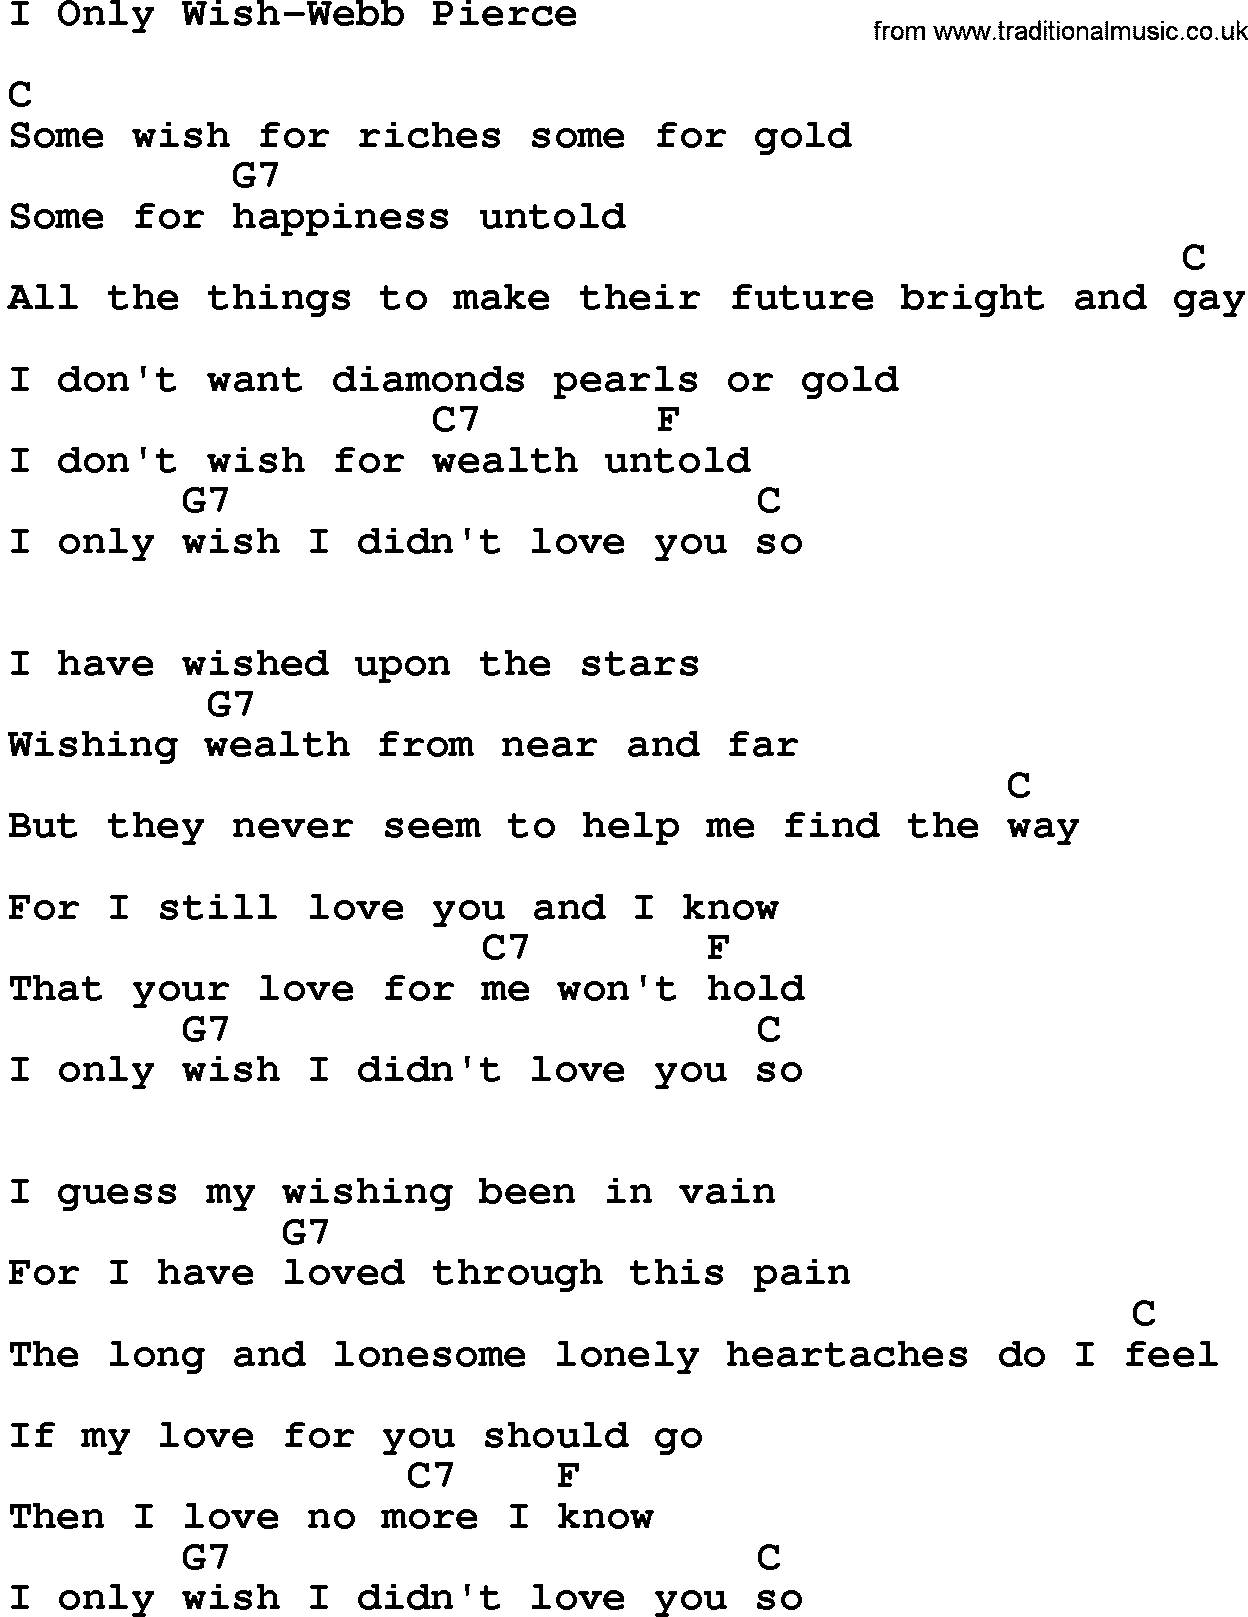 Country music song: I Only Wish-Webb Pierce lyrics and chords